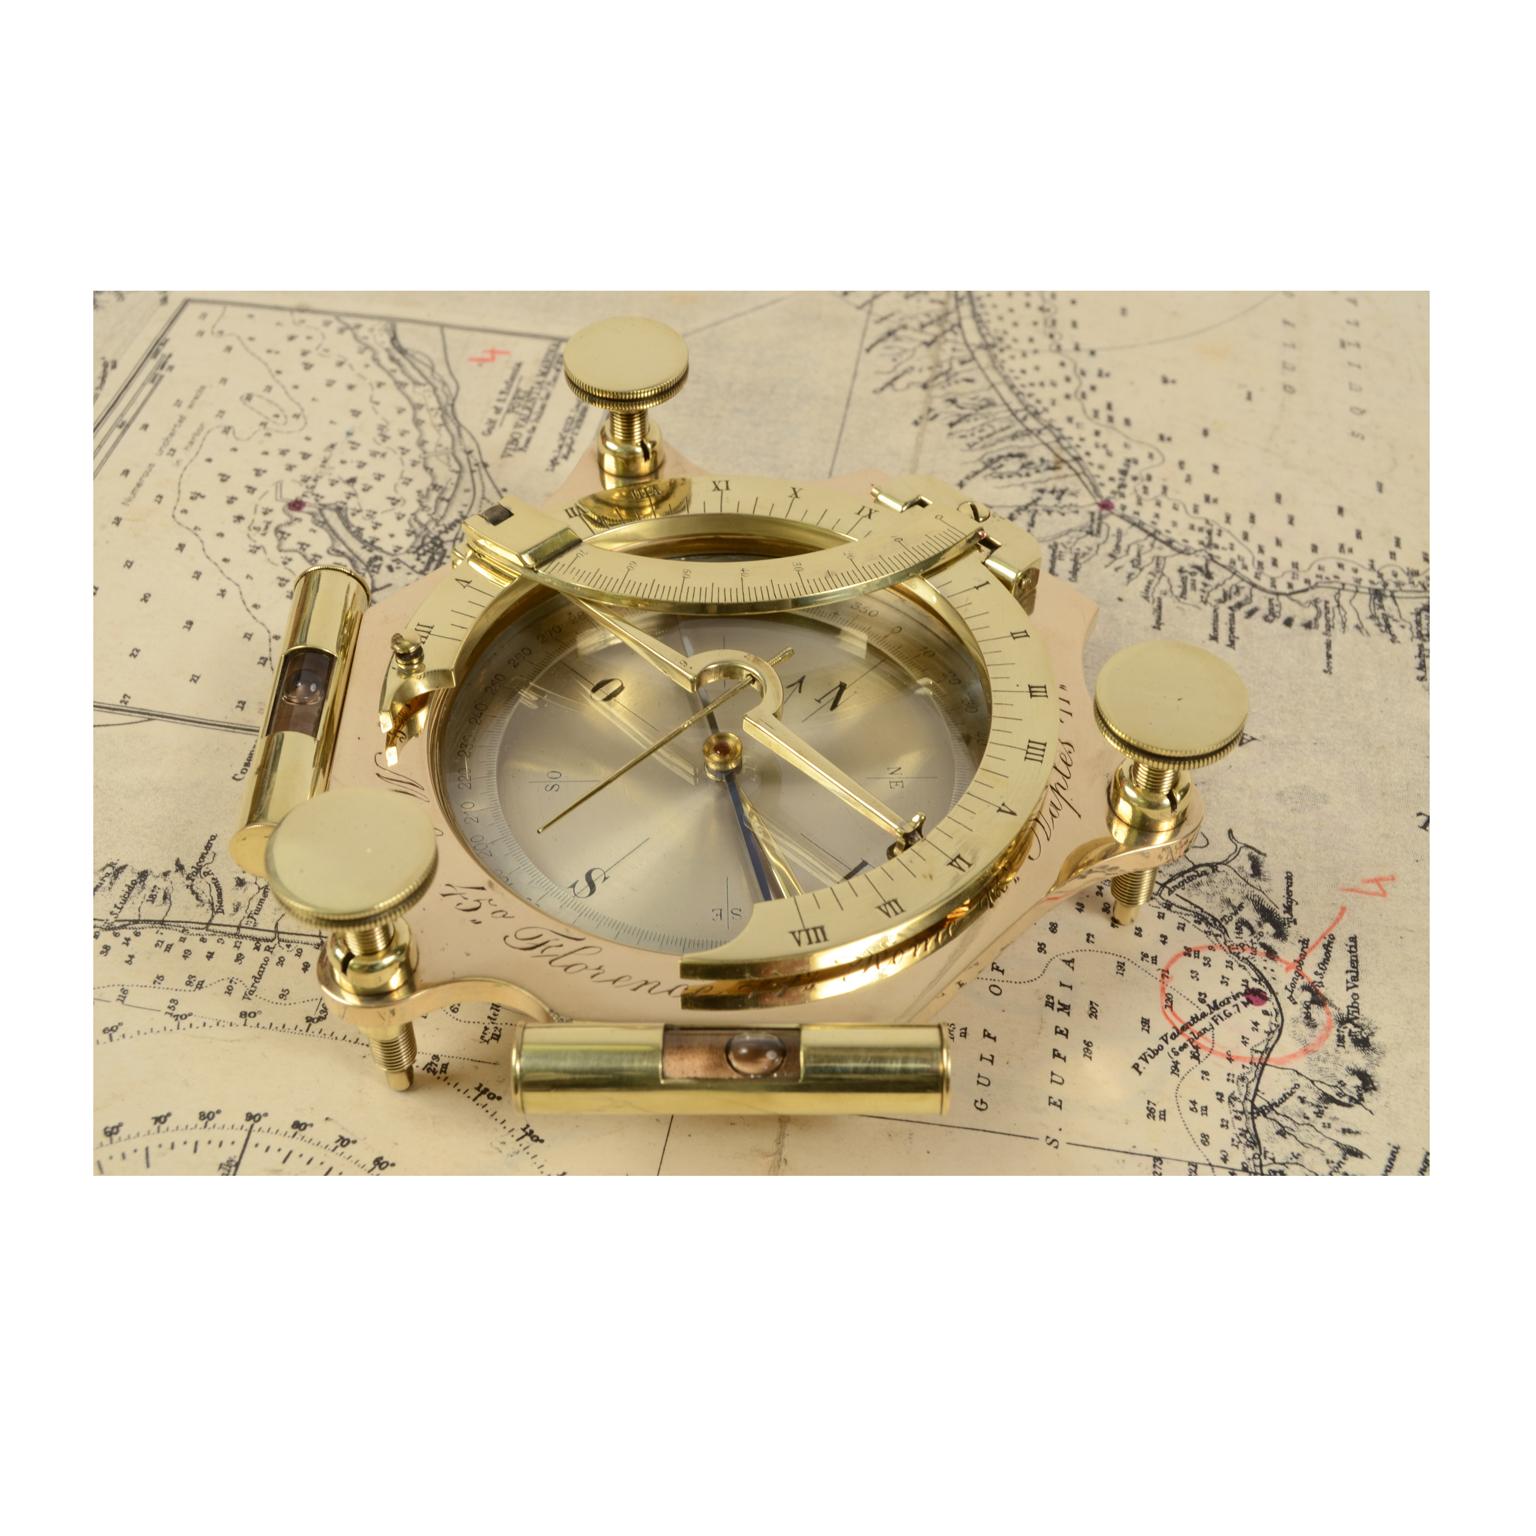 Equinoctial Sundial Engraved Brass and Glass Time Measuring Instrument UK 1840 8